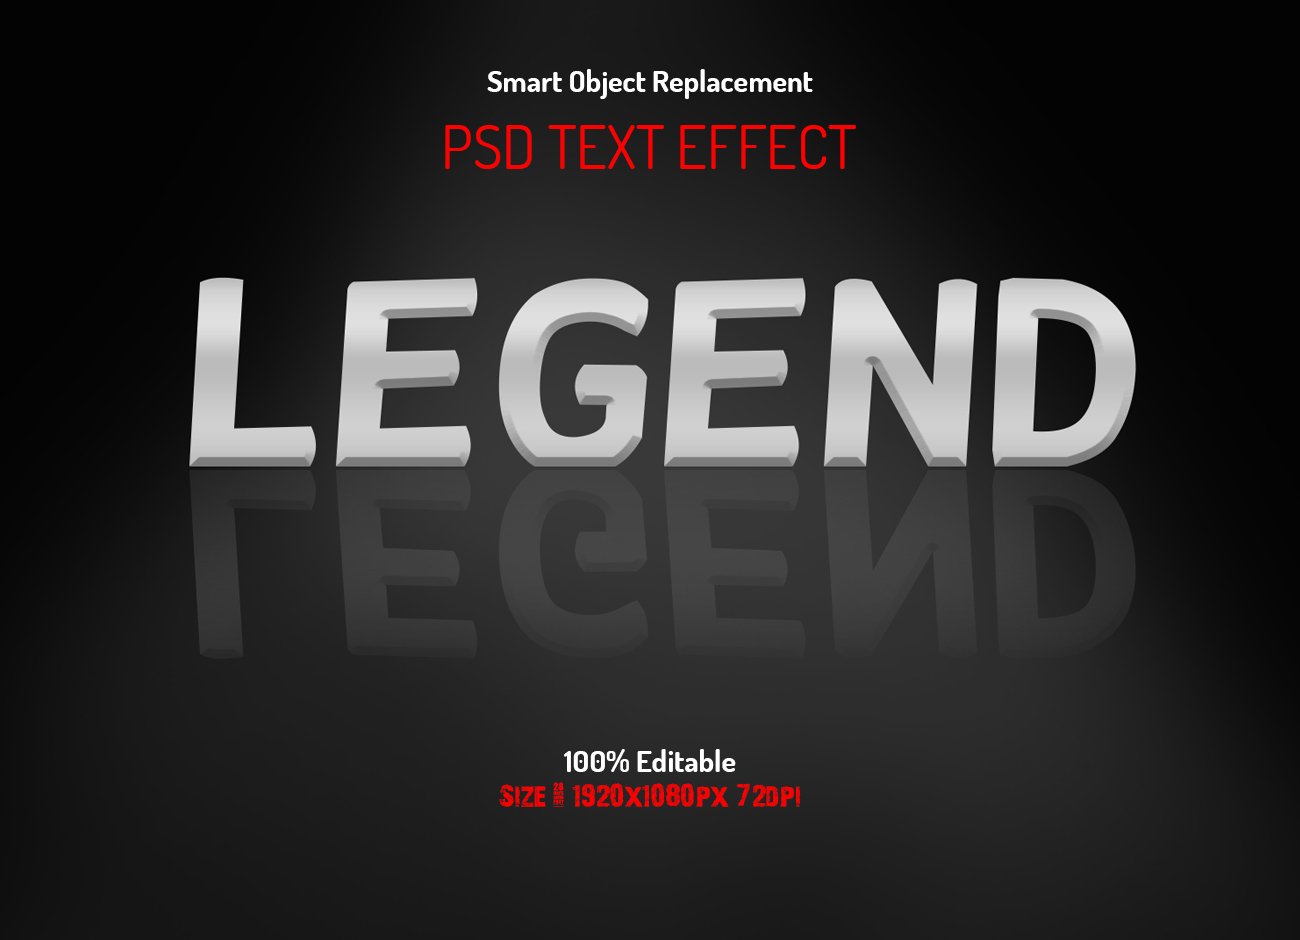 Reflection Text Effectpreview image.